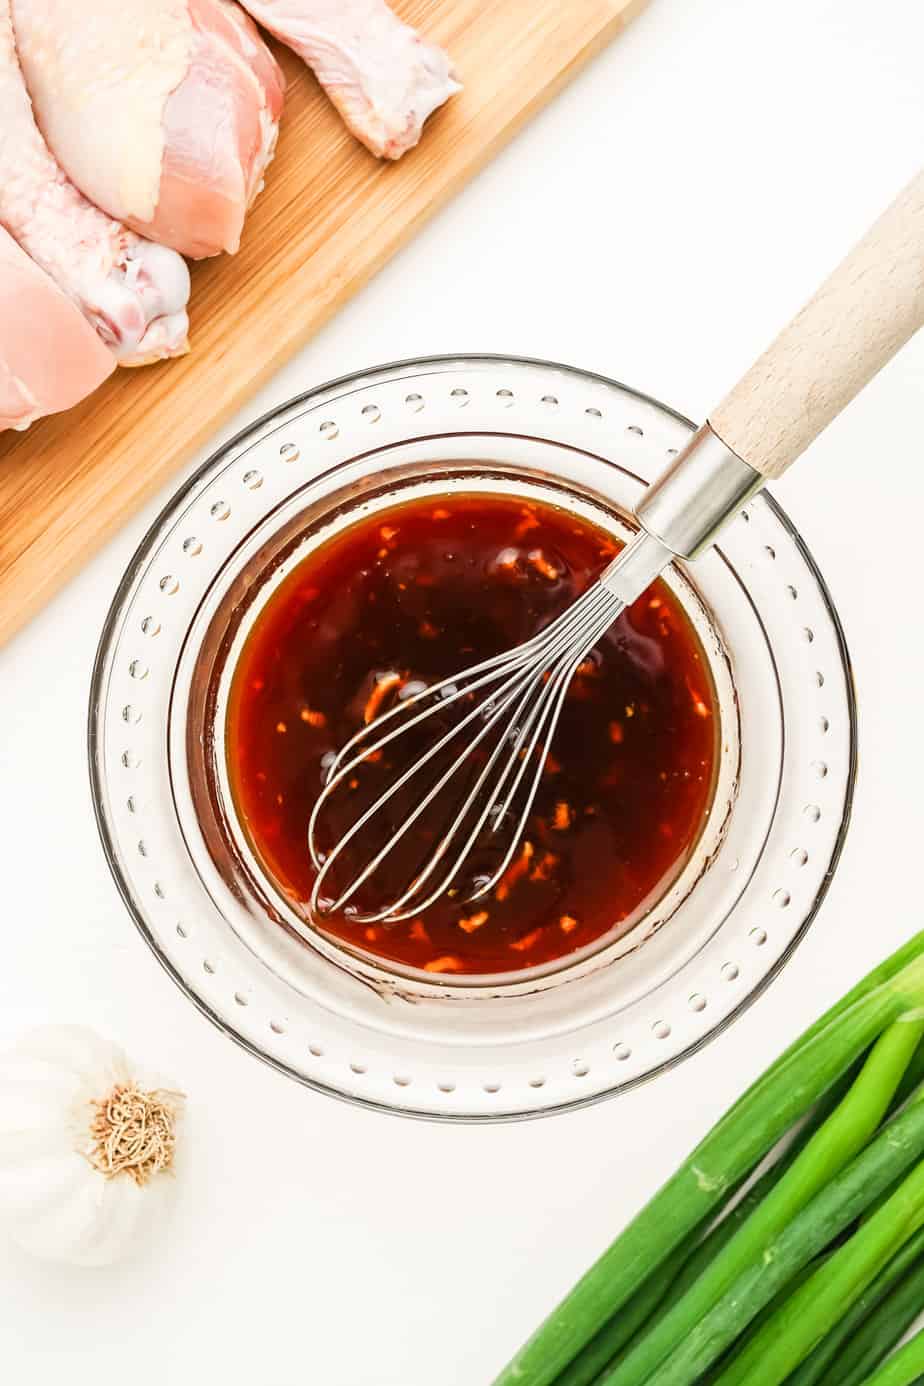 Mixing together sauce ingredients in a bowl from above with a whisk in the bowl.